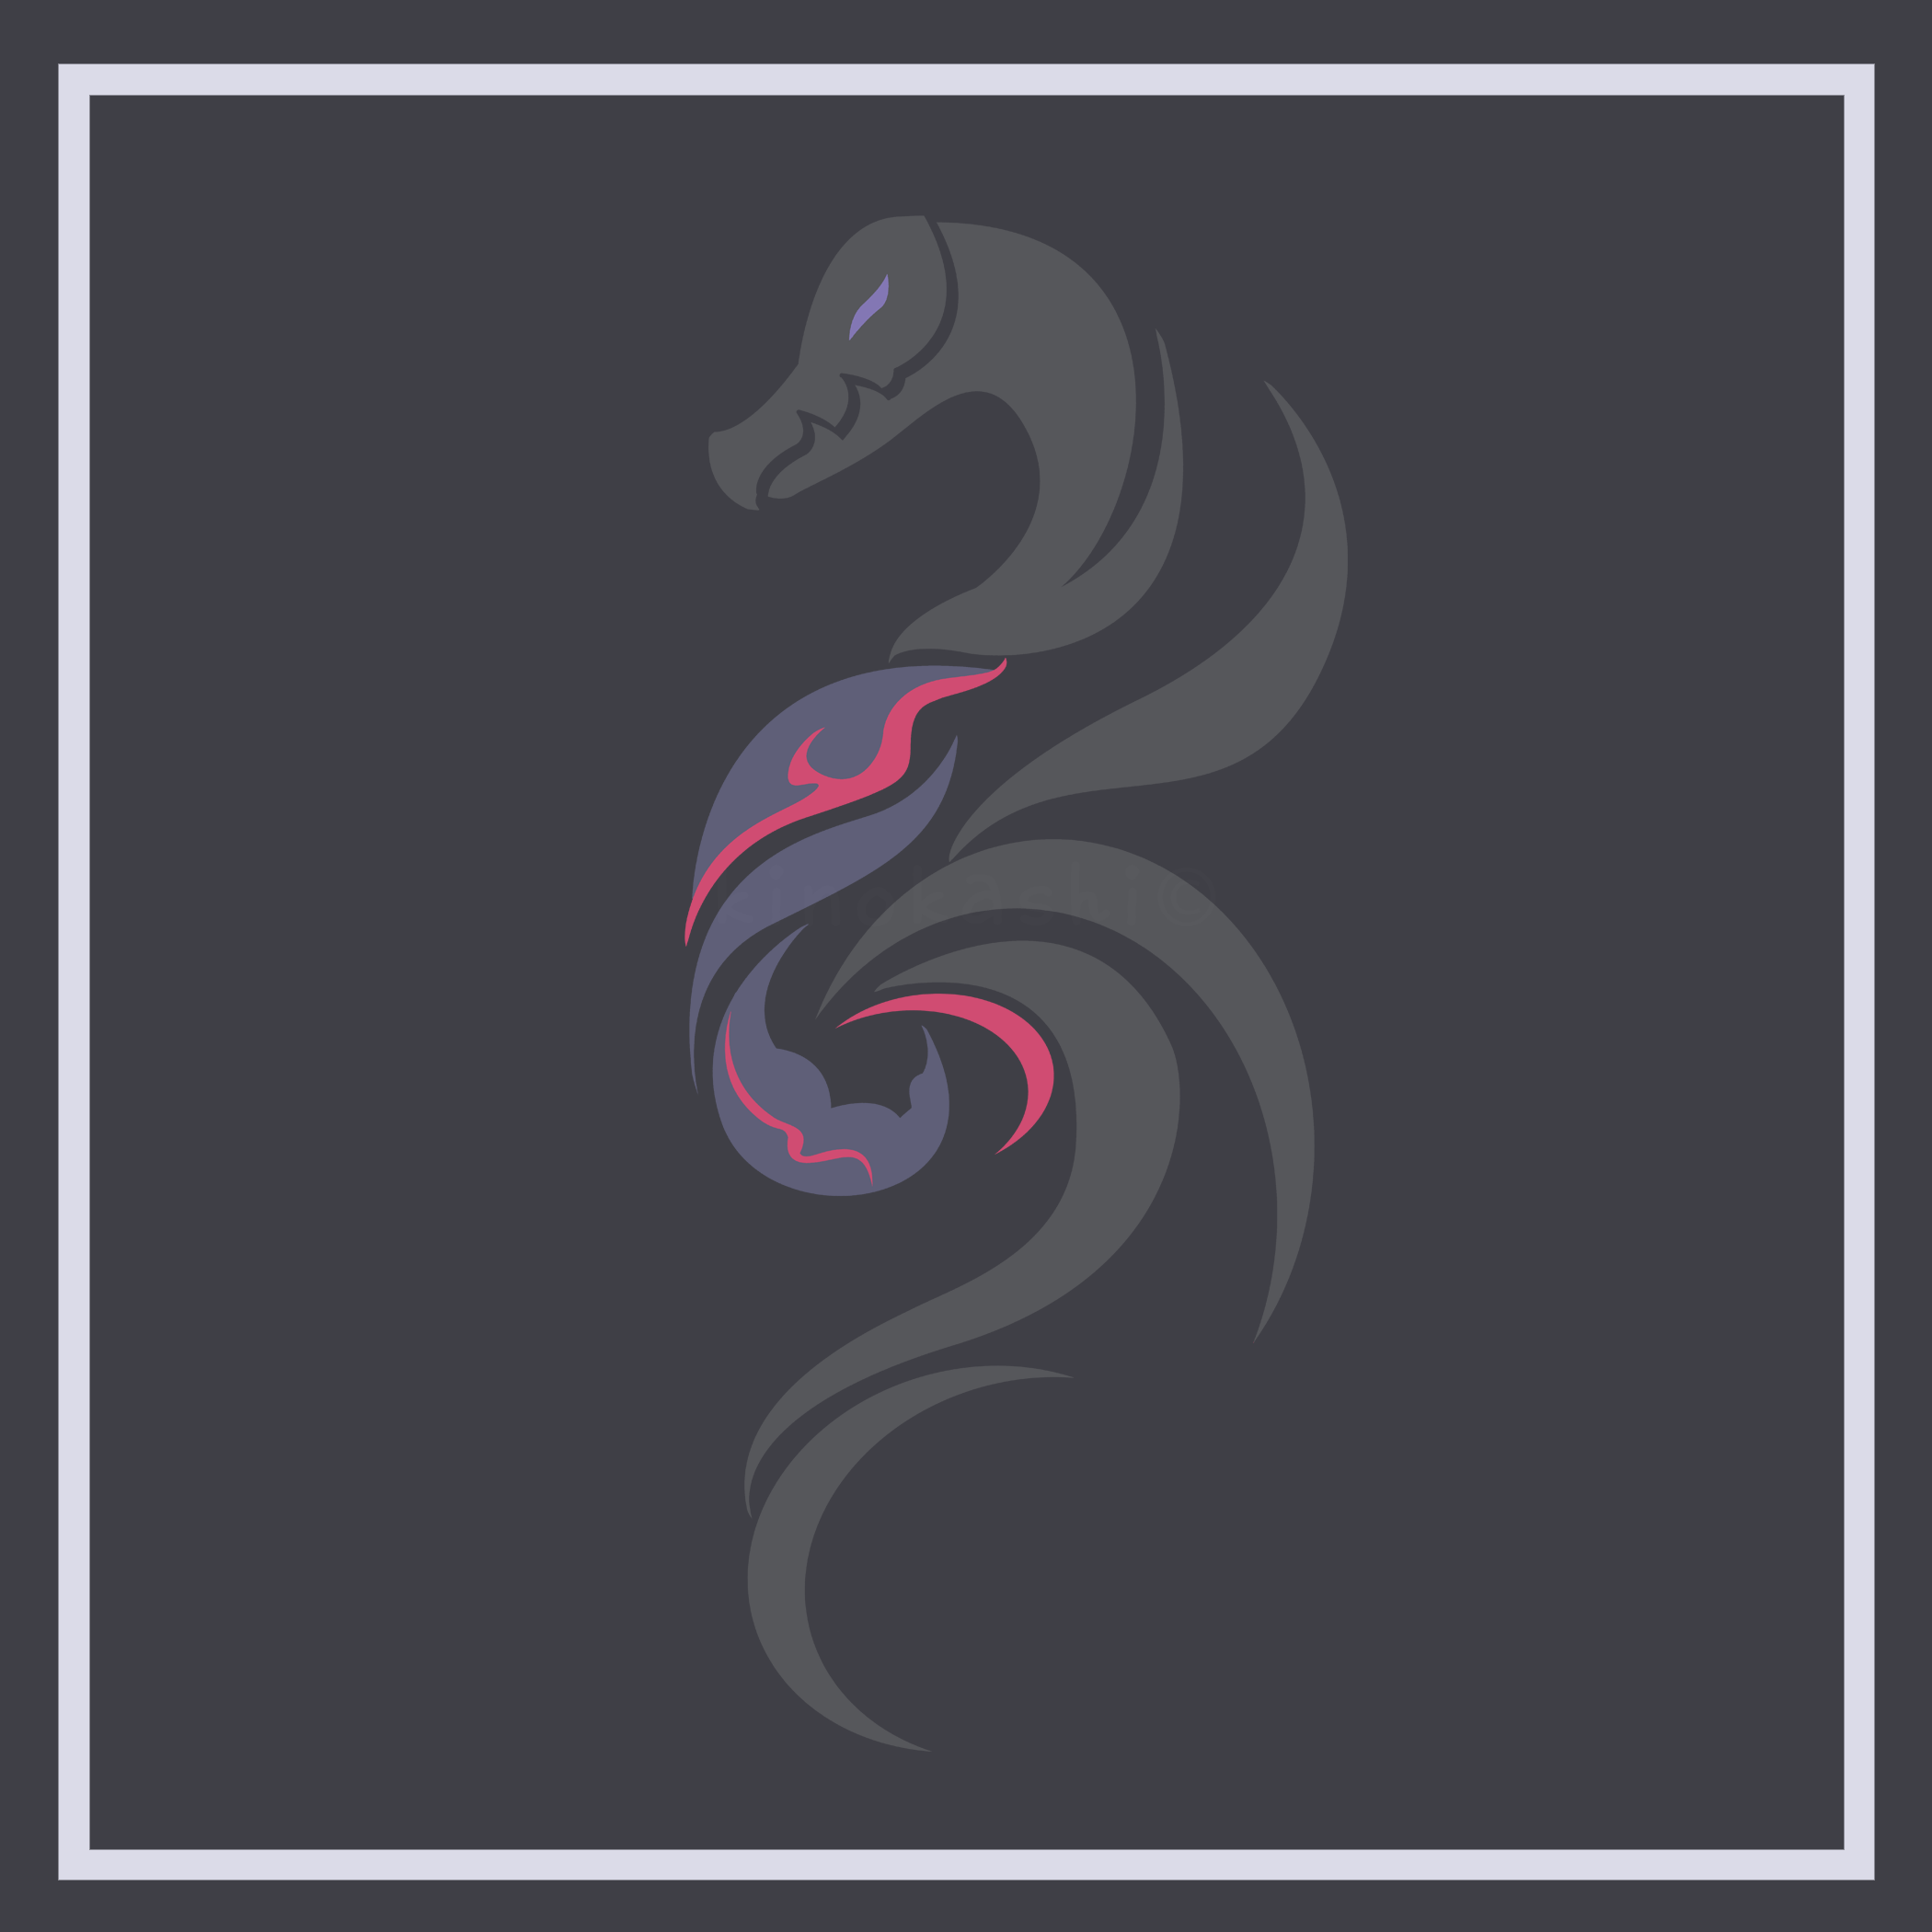 Salazzle Design from my Rare Candy design Set. [OC]